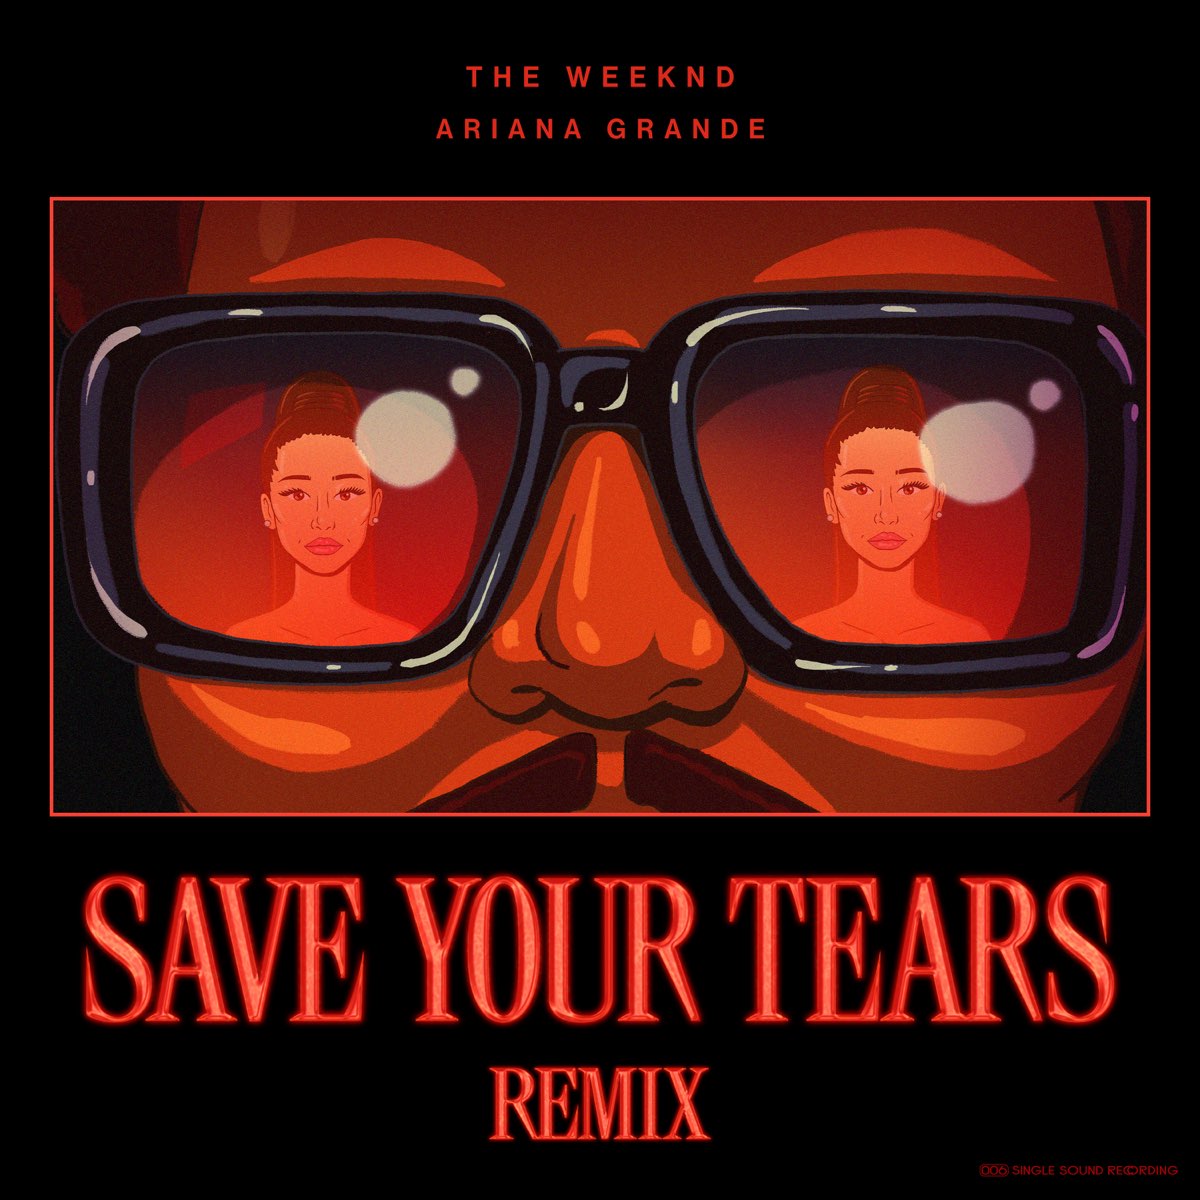 Save your tears remix mp3 download subtitles download